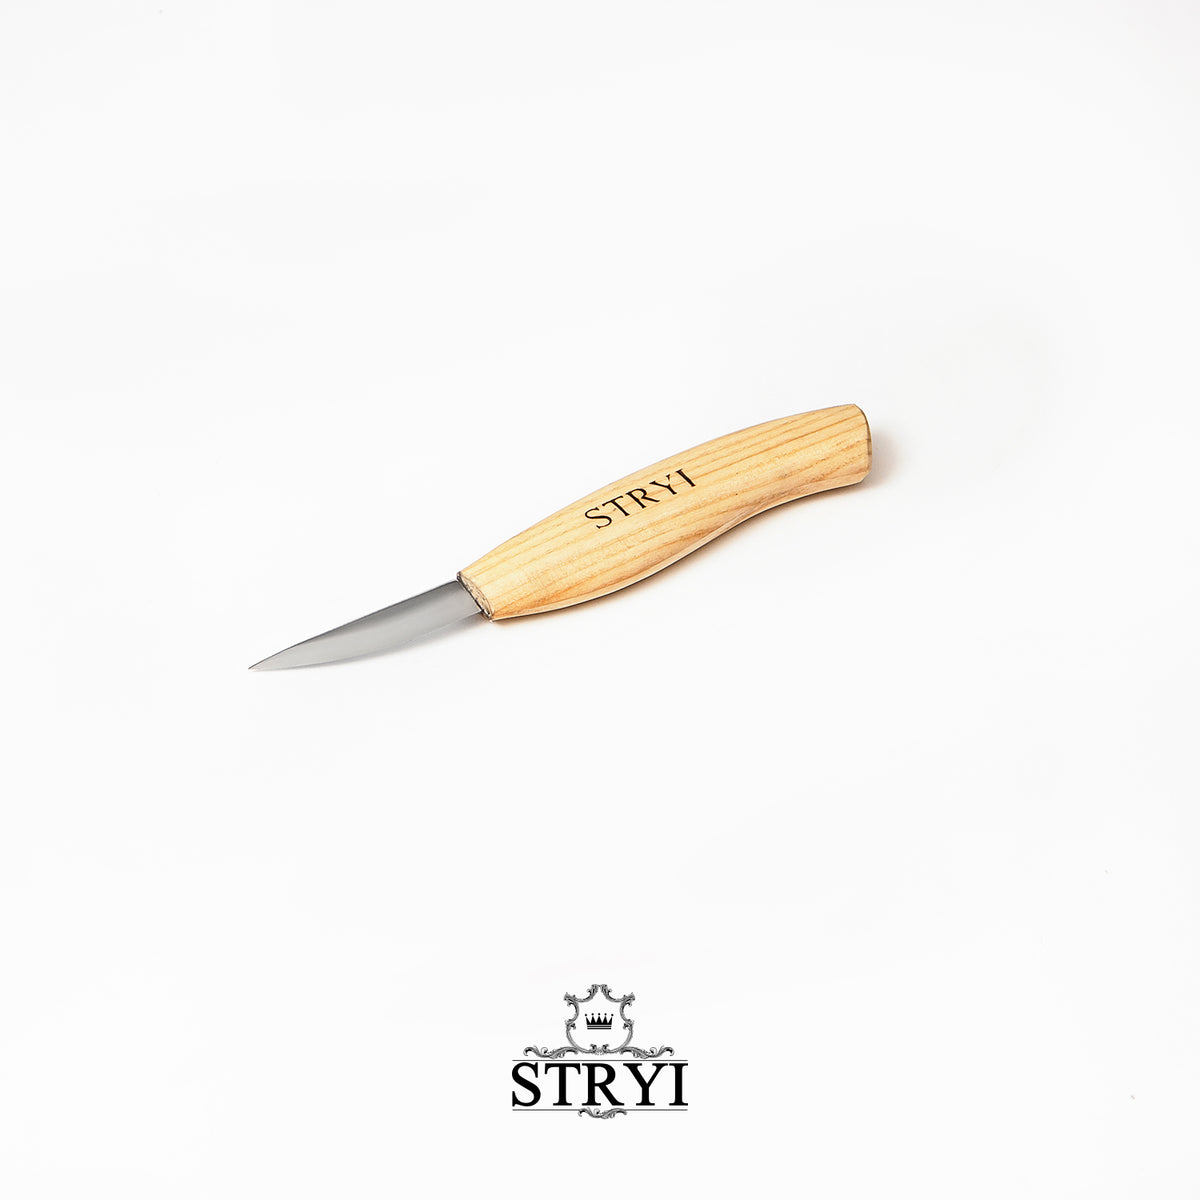 STRYI Whittling Knife 50mm - Dubbeld Wood Tools